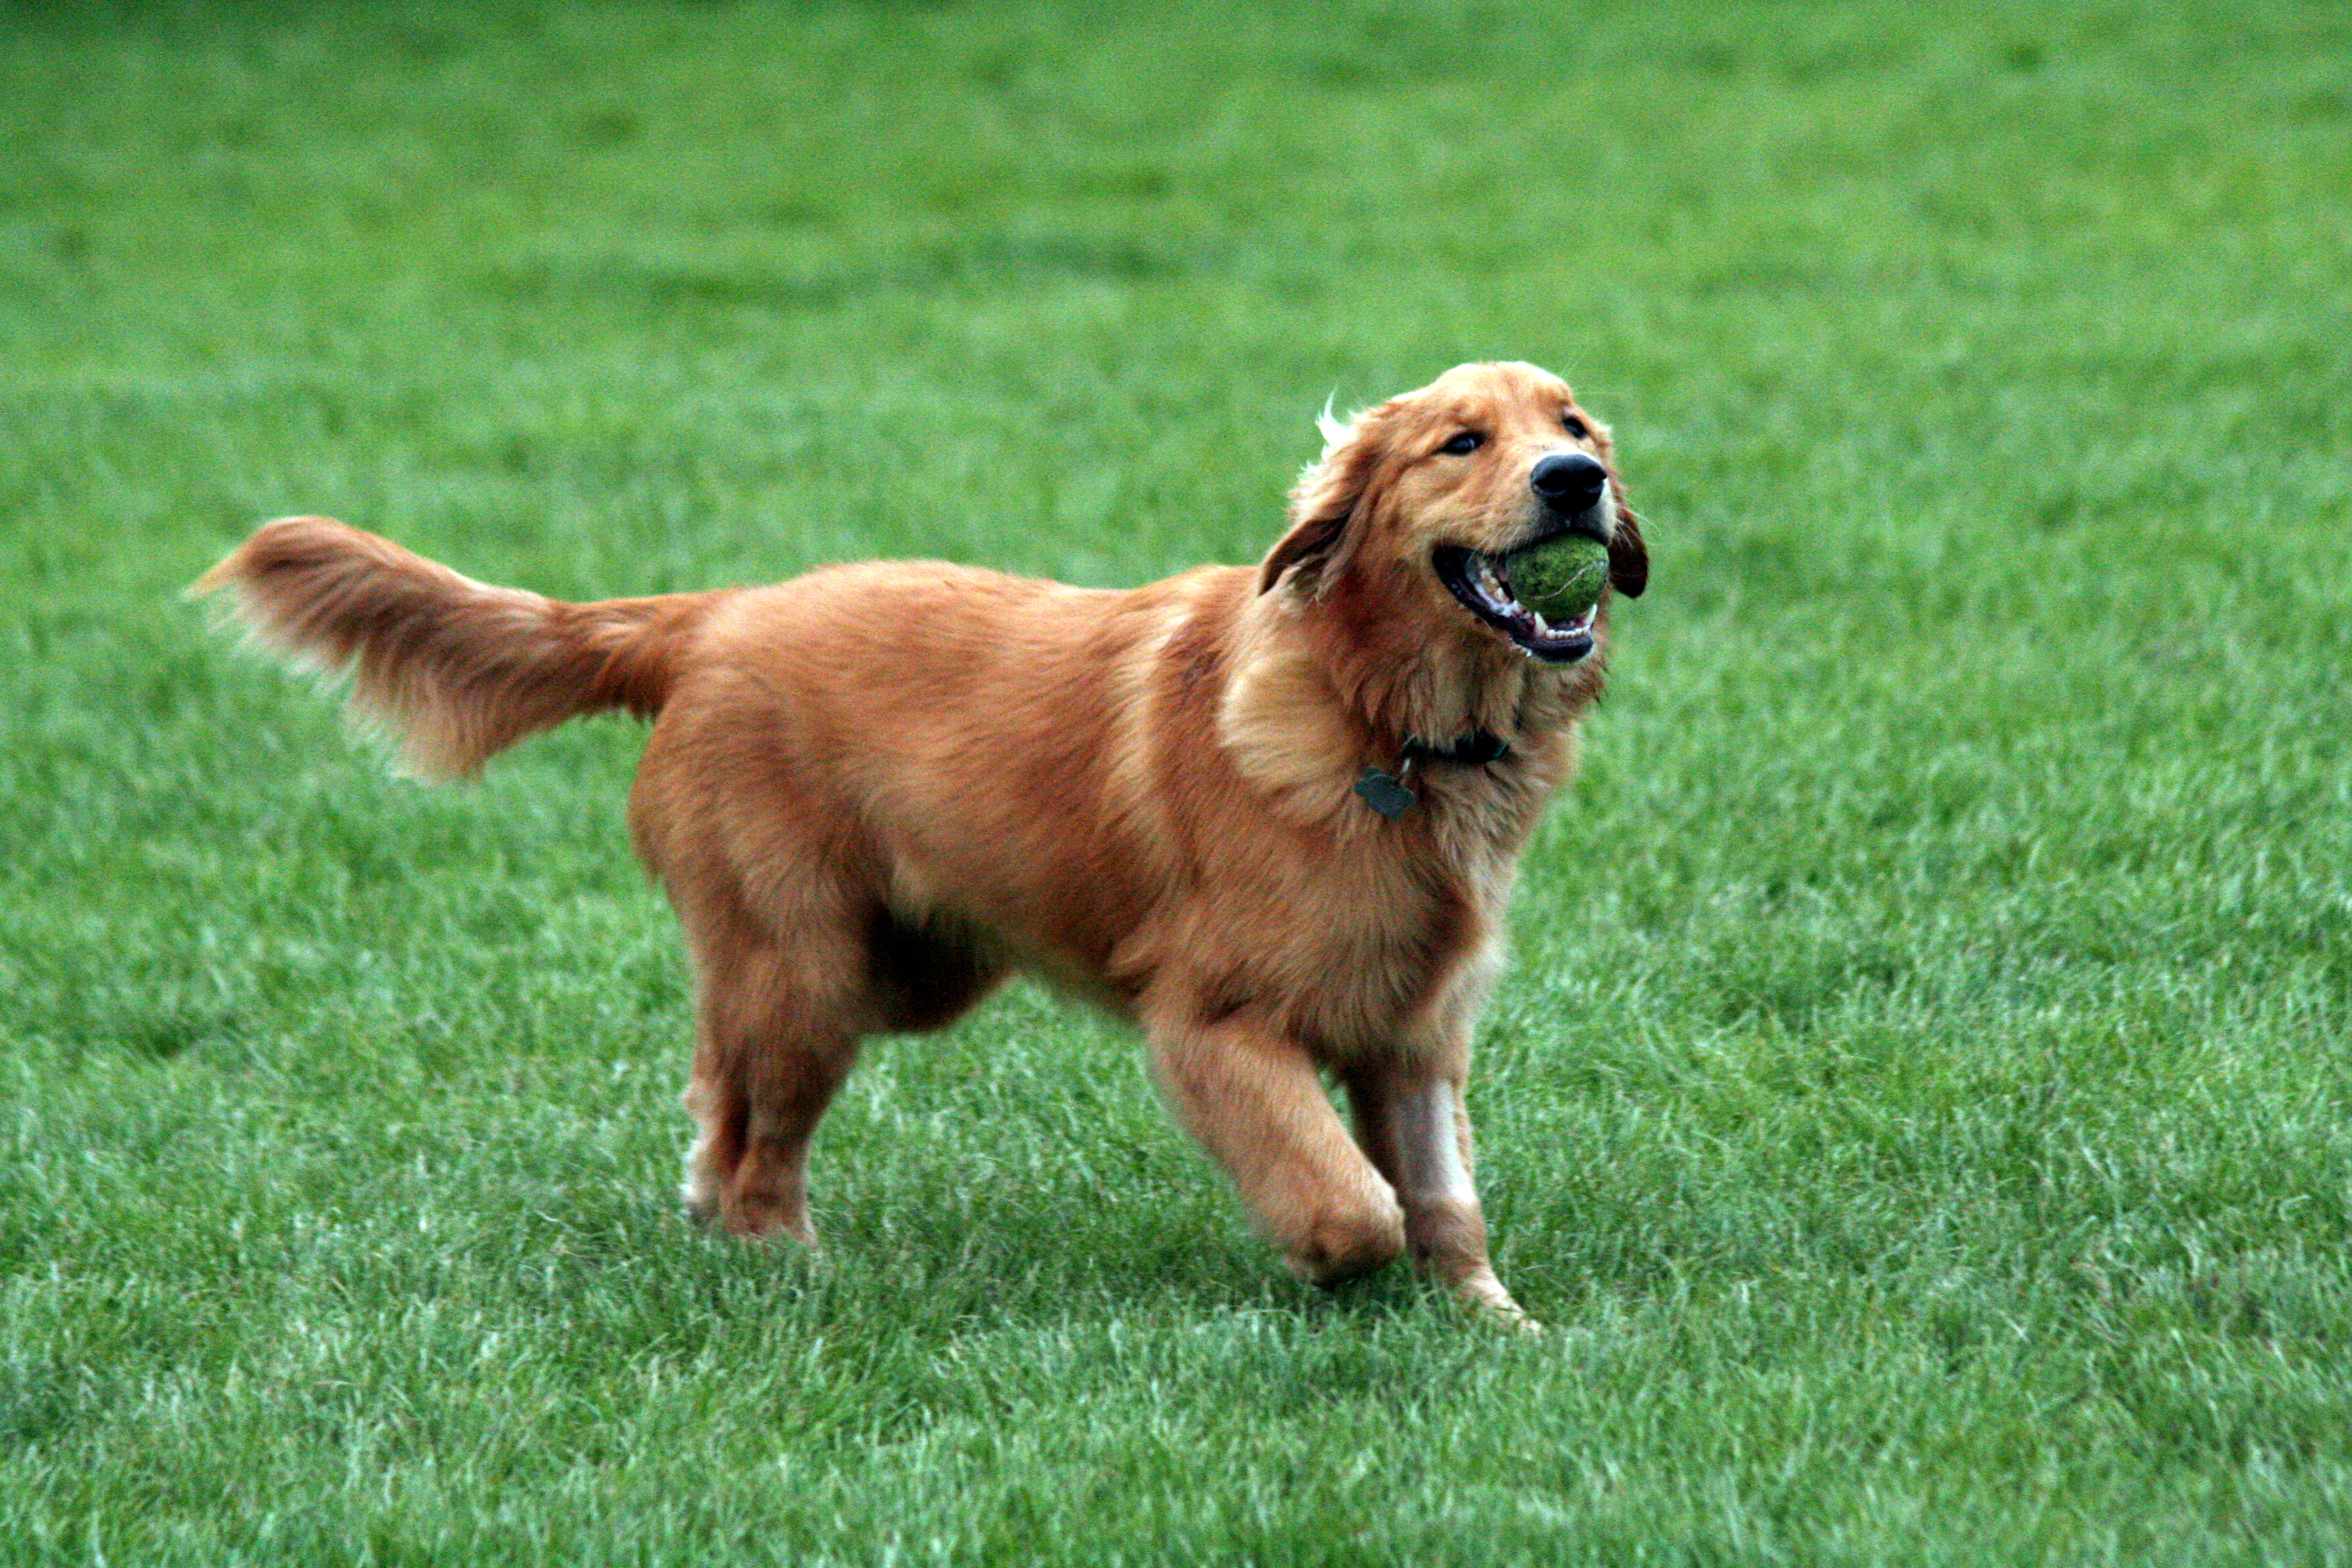 Golden Retriever Breed Guide - Learn about the Golden Retriever.